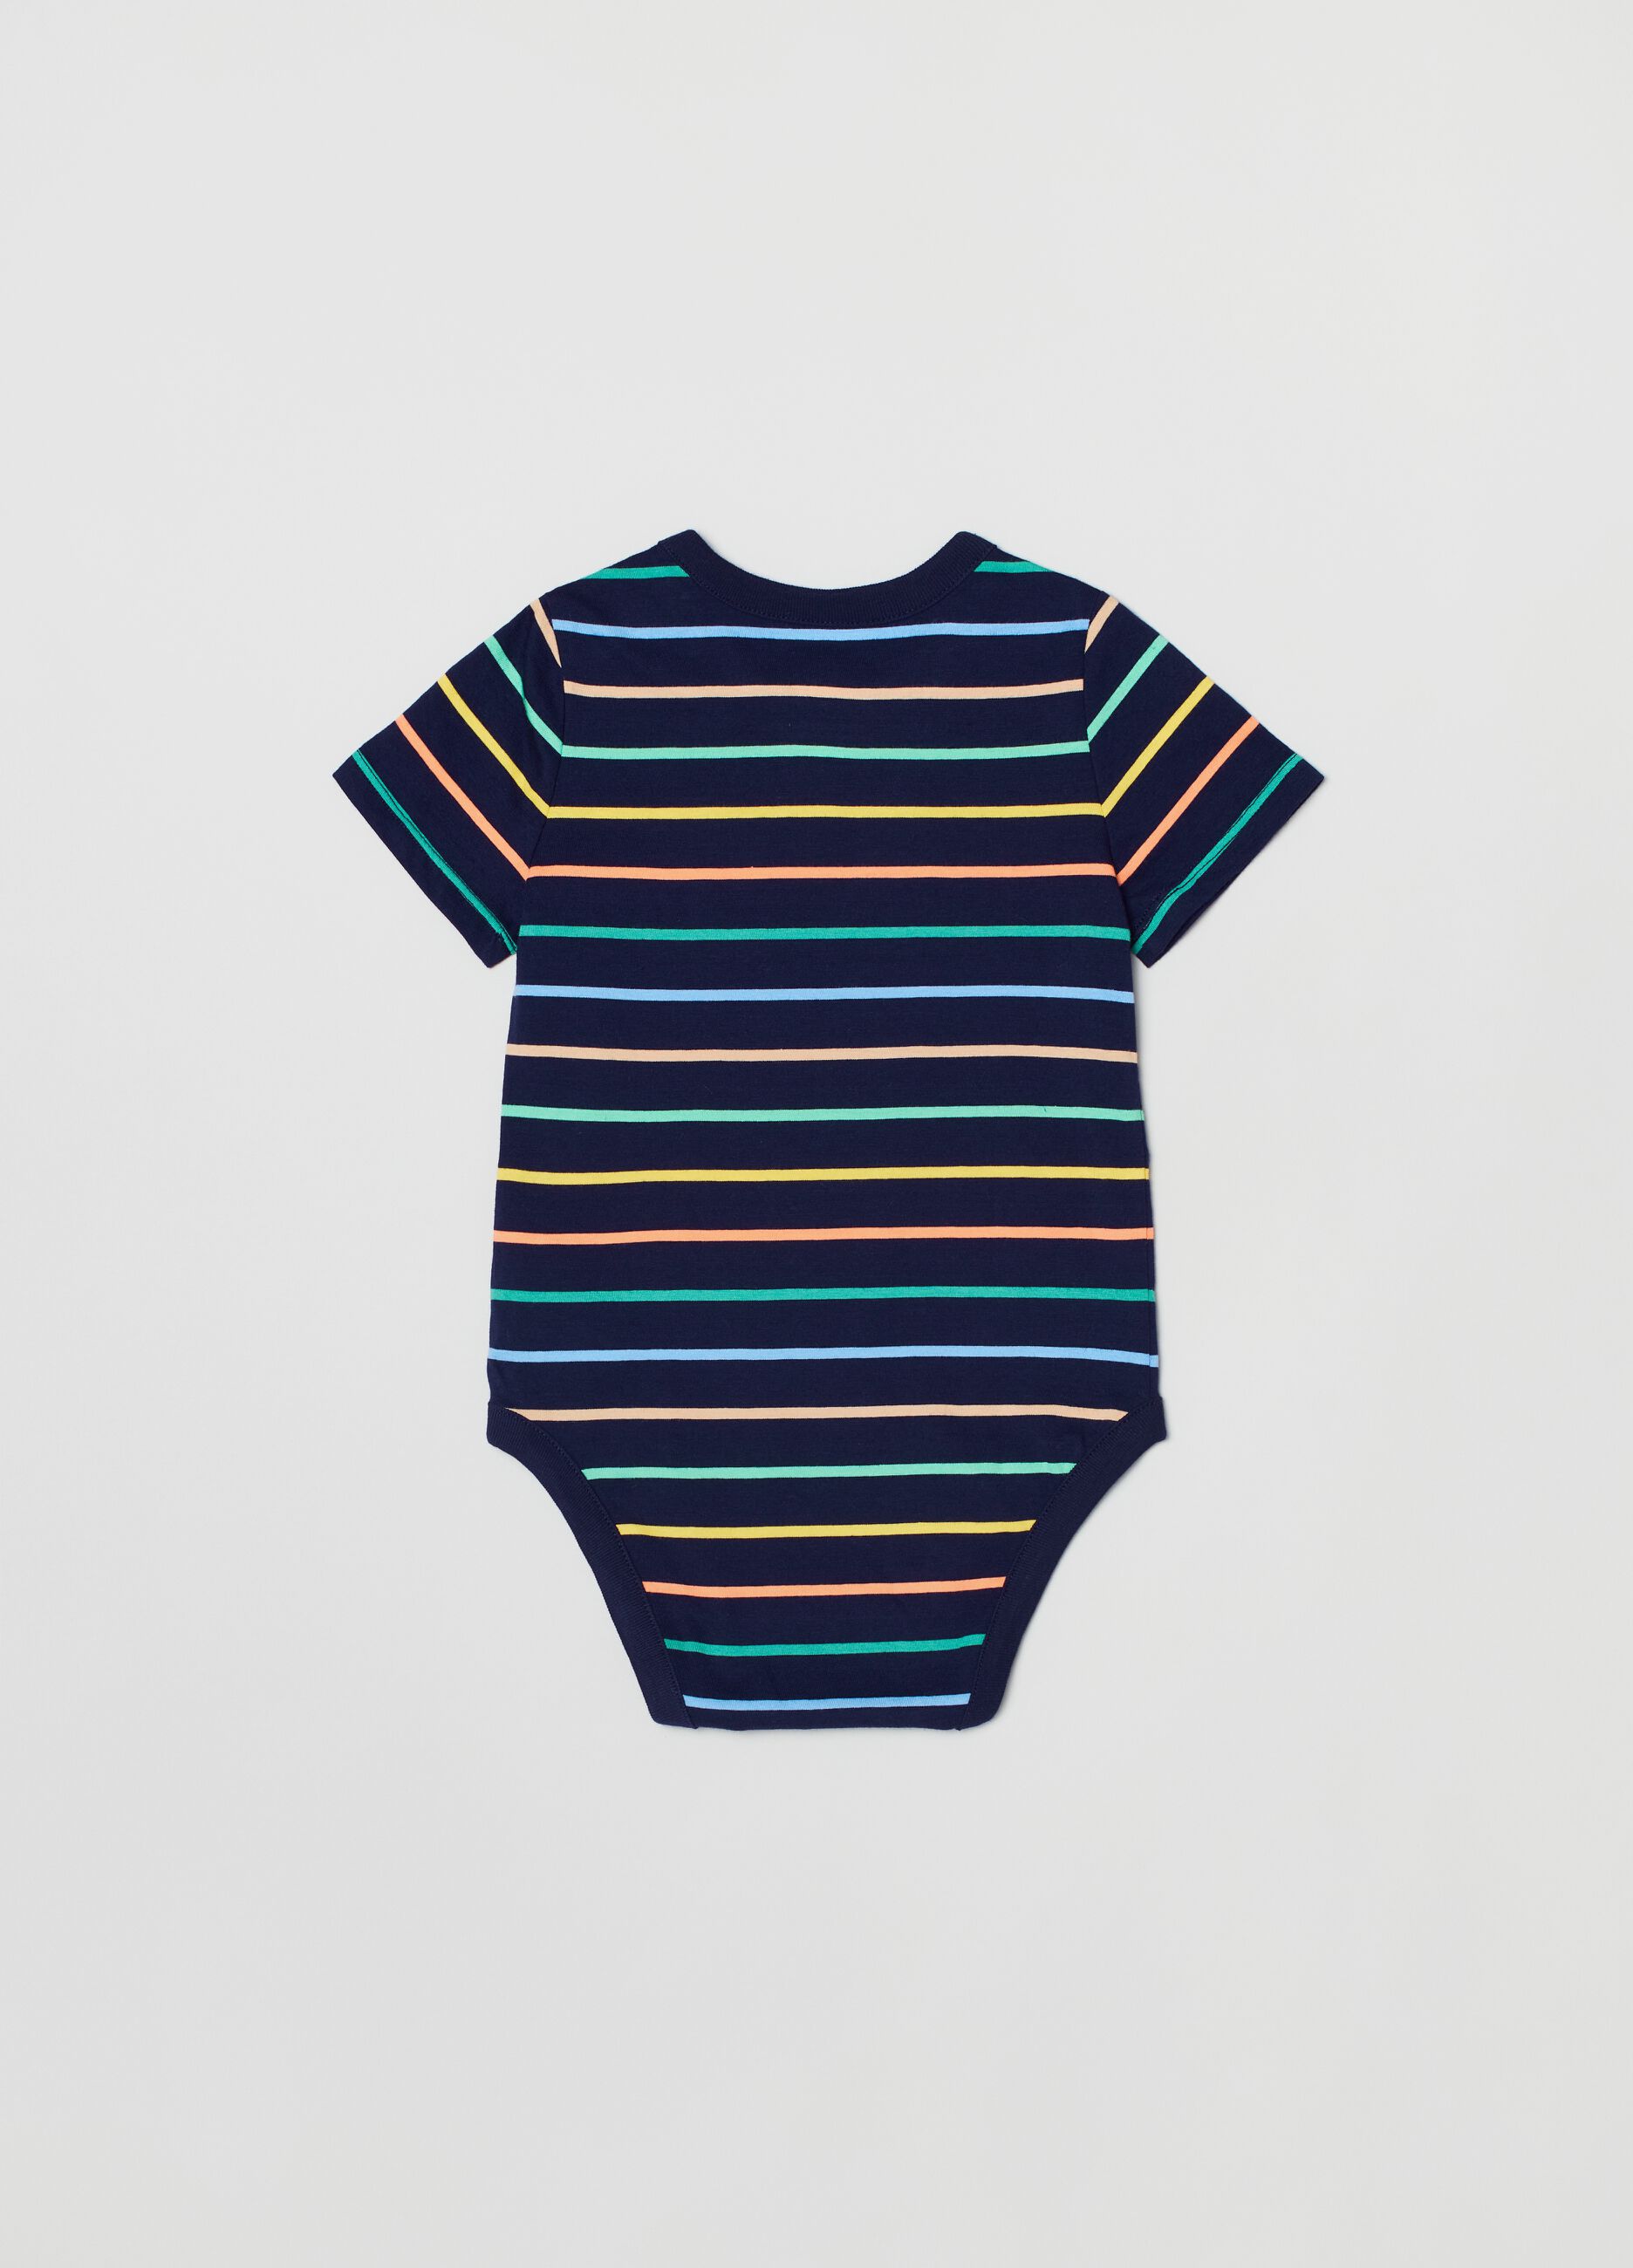 Cotton bodysuit with striped pattern